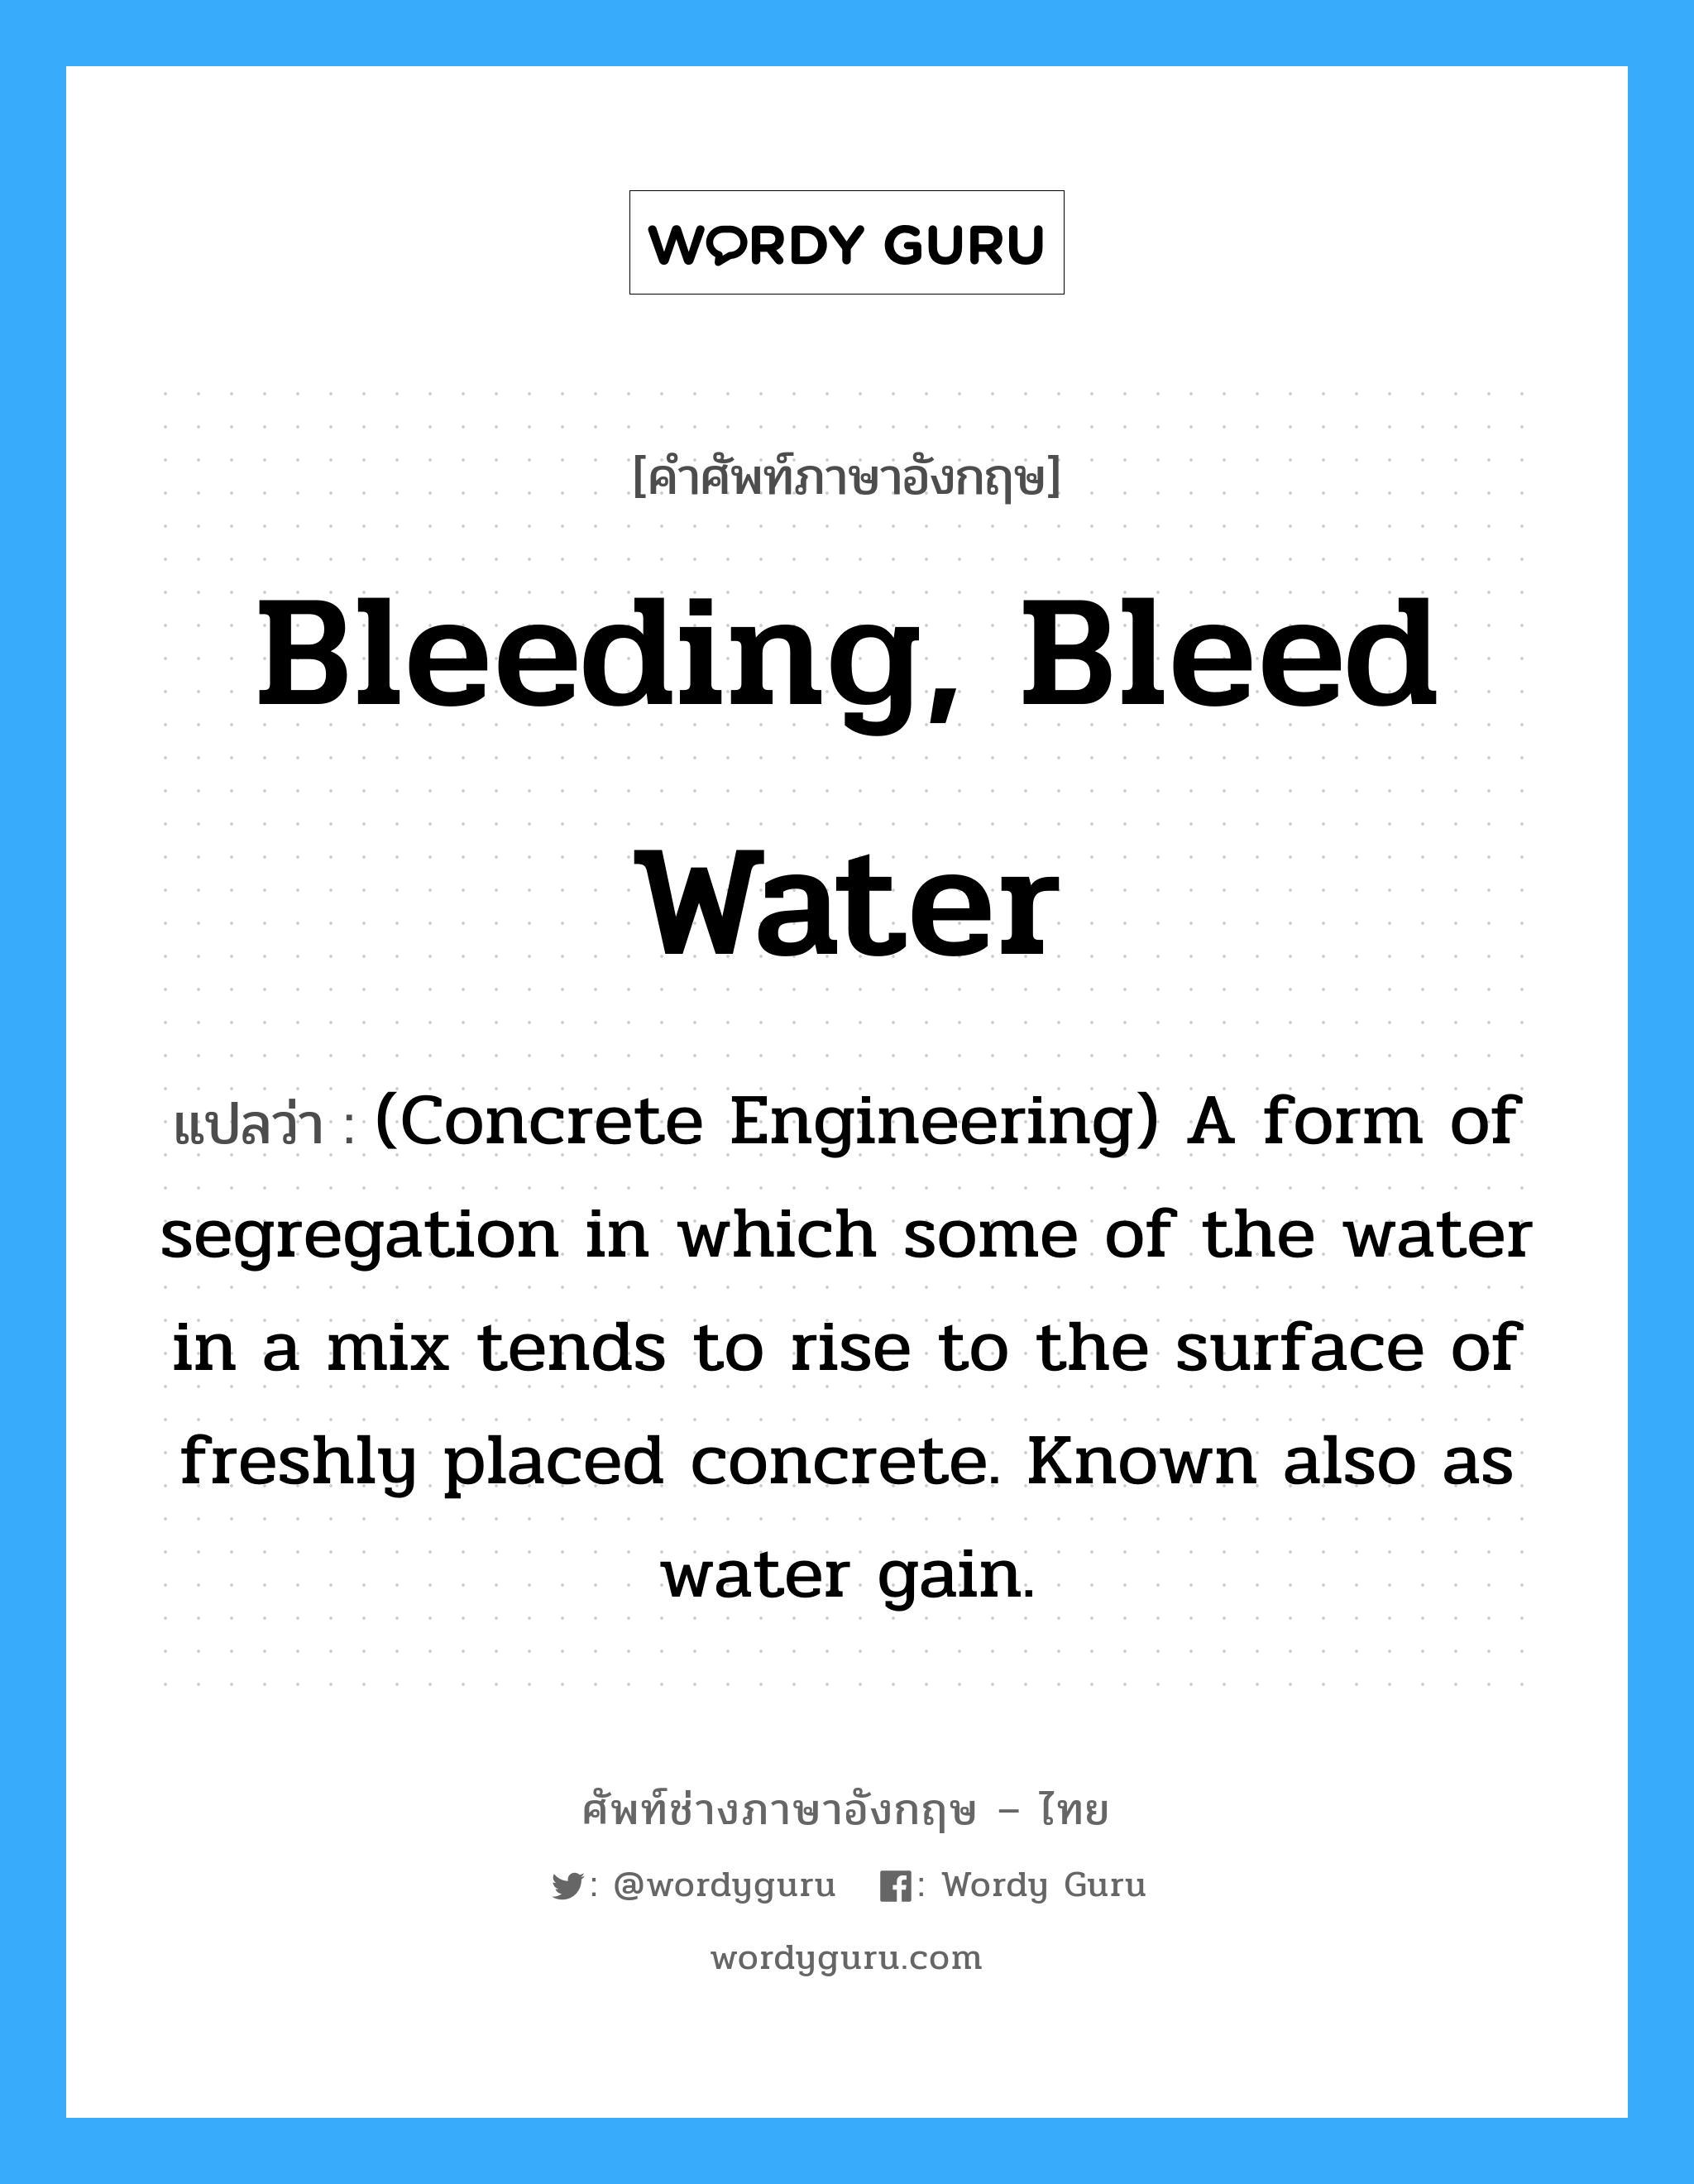 Bleeding, Bleed Water แปลว่า?, คำศัพท์ช่างภาษาอังกฤษ - ไทย Bleeding, Bleed Water คำศัพท์ภาษาอังกฤษ Bleeding, Bleed Water แปลว่า (Concrete Engineering) A form of segregation in which some of the water in a mix tends to rise to the surface of freshly placed concrete. Known also as water gain.